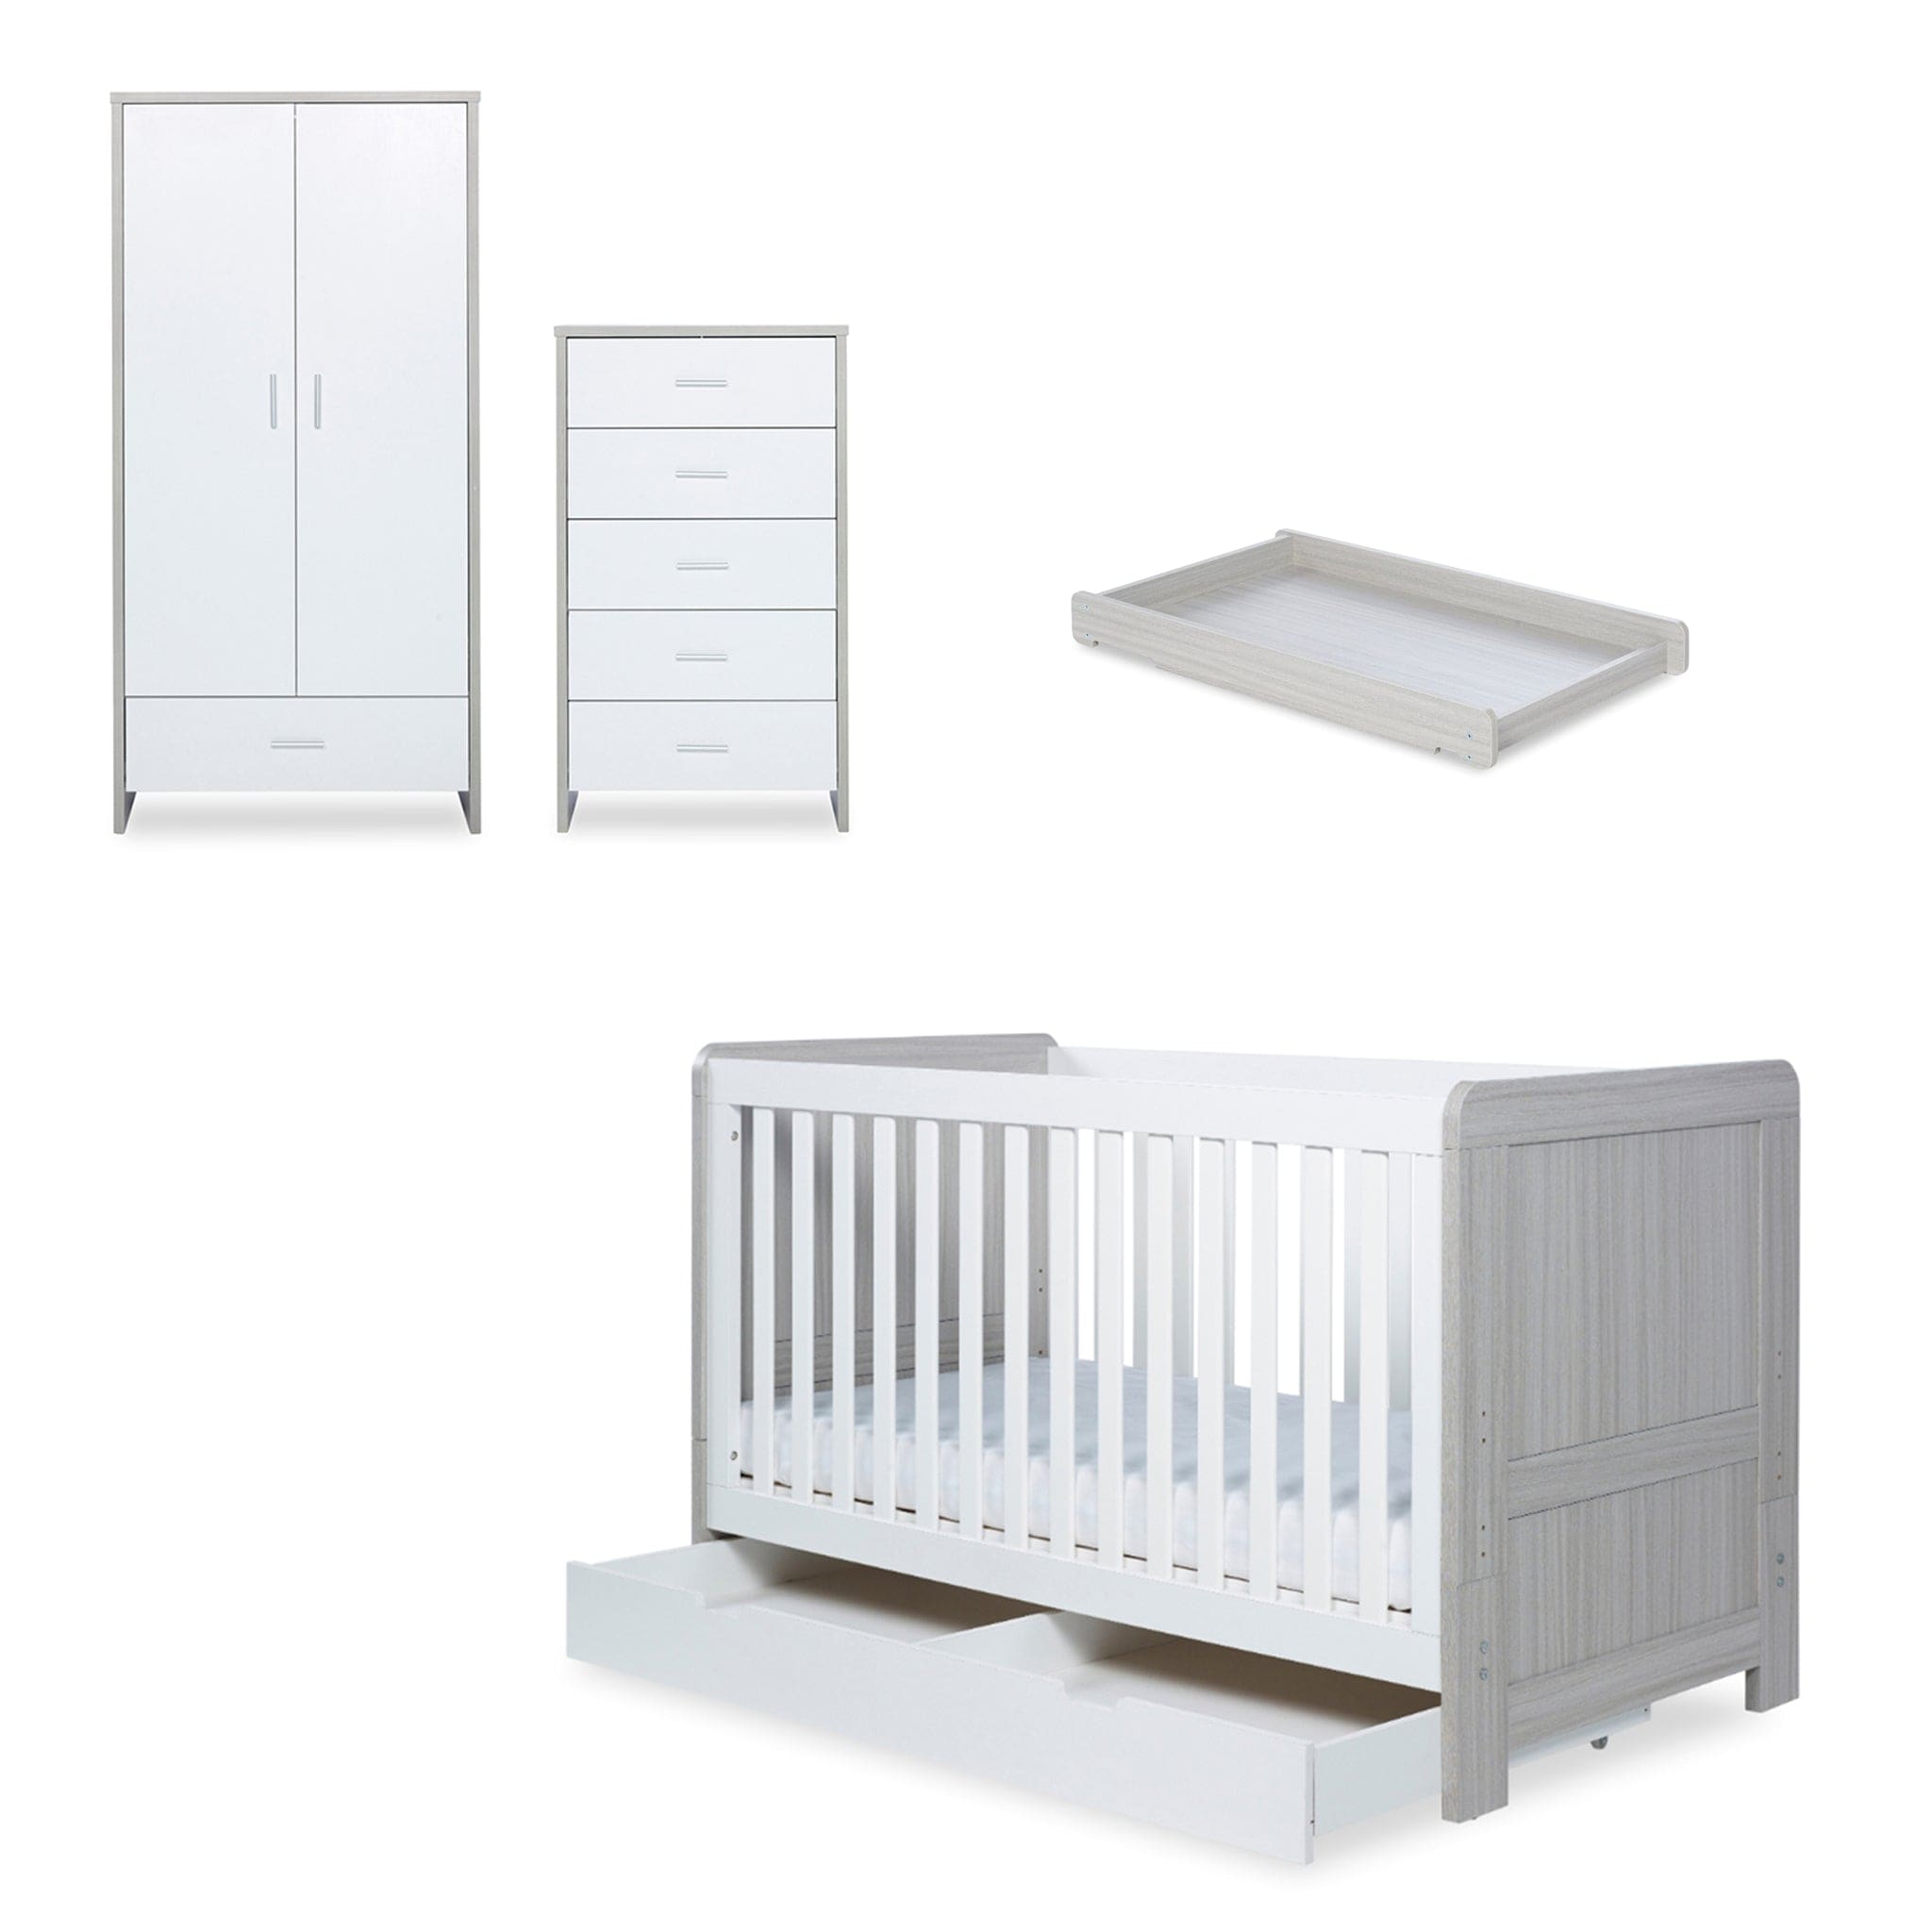 Ickle Bubba Nursery Room Sets Ickle Bubba Pembrey 4 Piece Furniture Set and Under Drawer Ash Grey & White